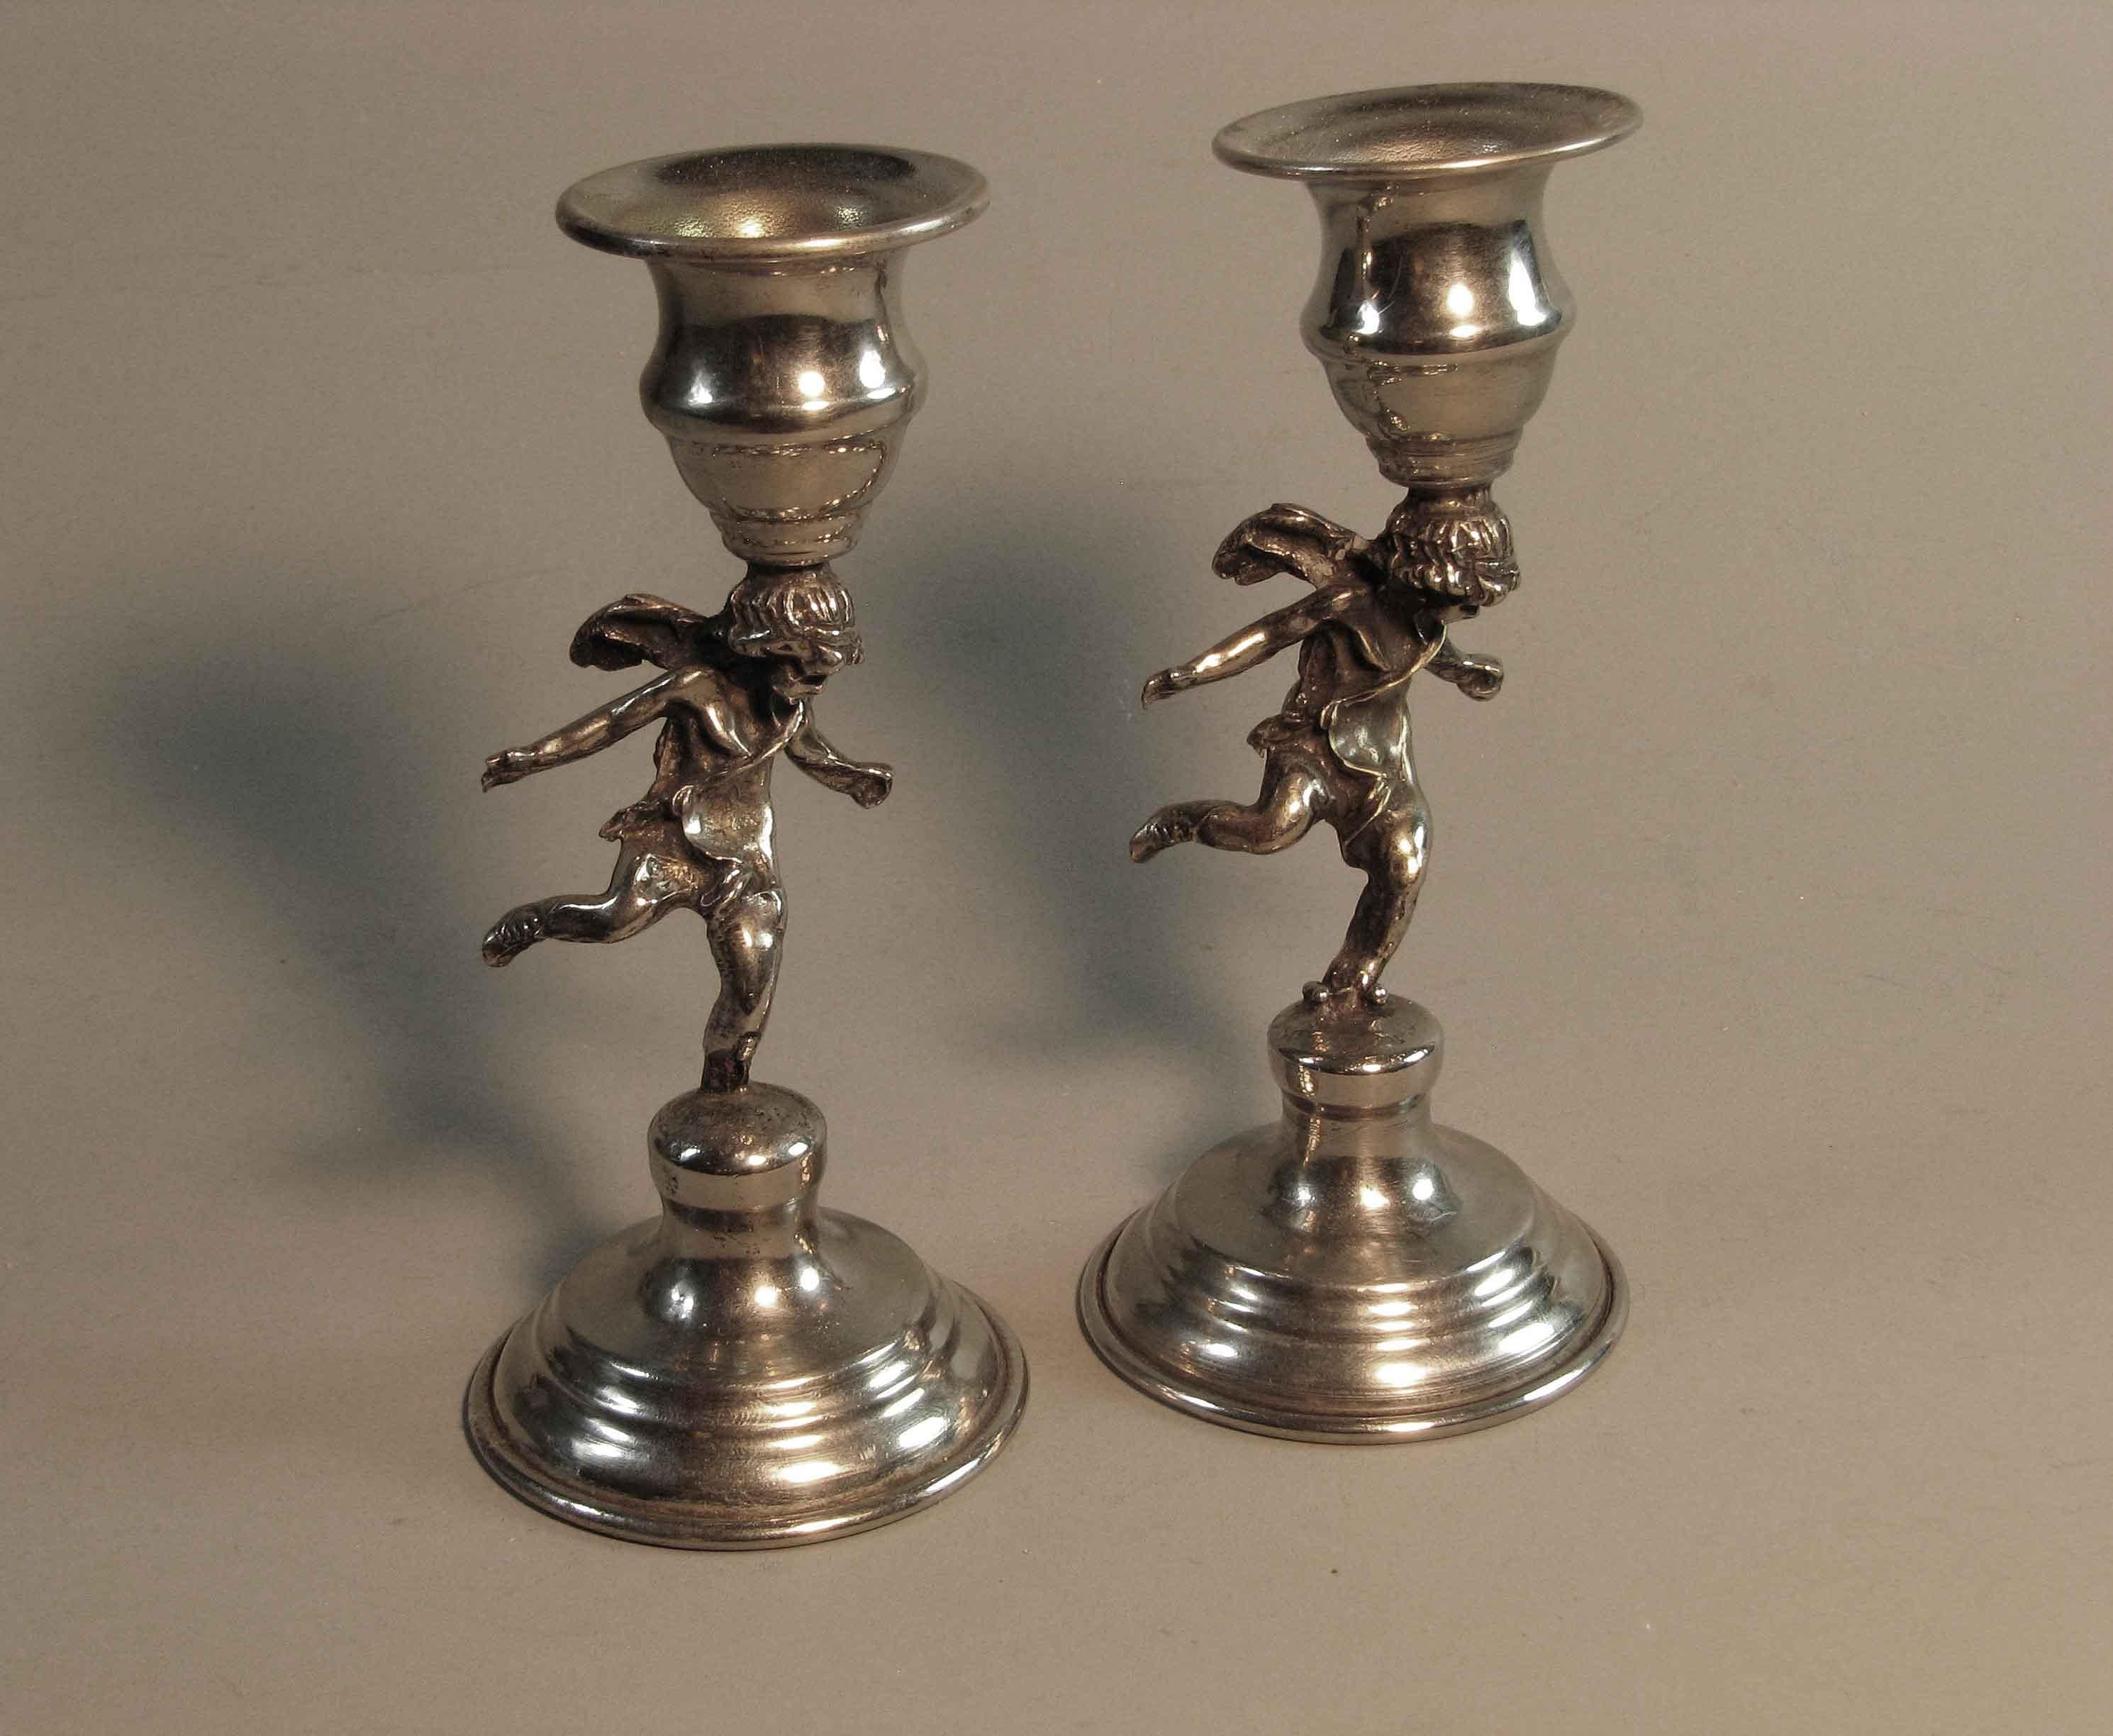 20th Century Pair of Sterling Silver Fused Glass Shabbat Candlesticks For Sale